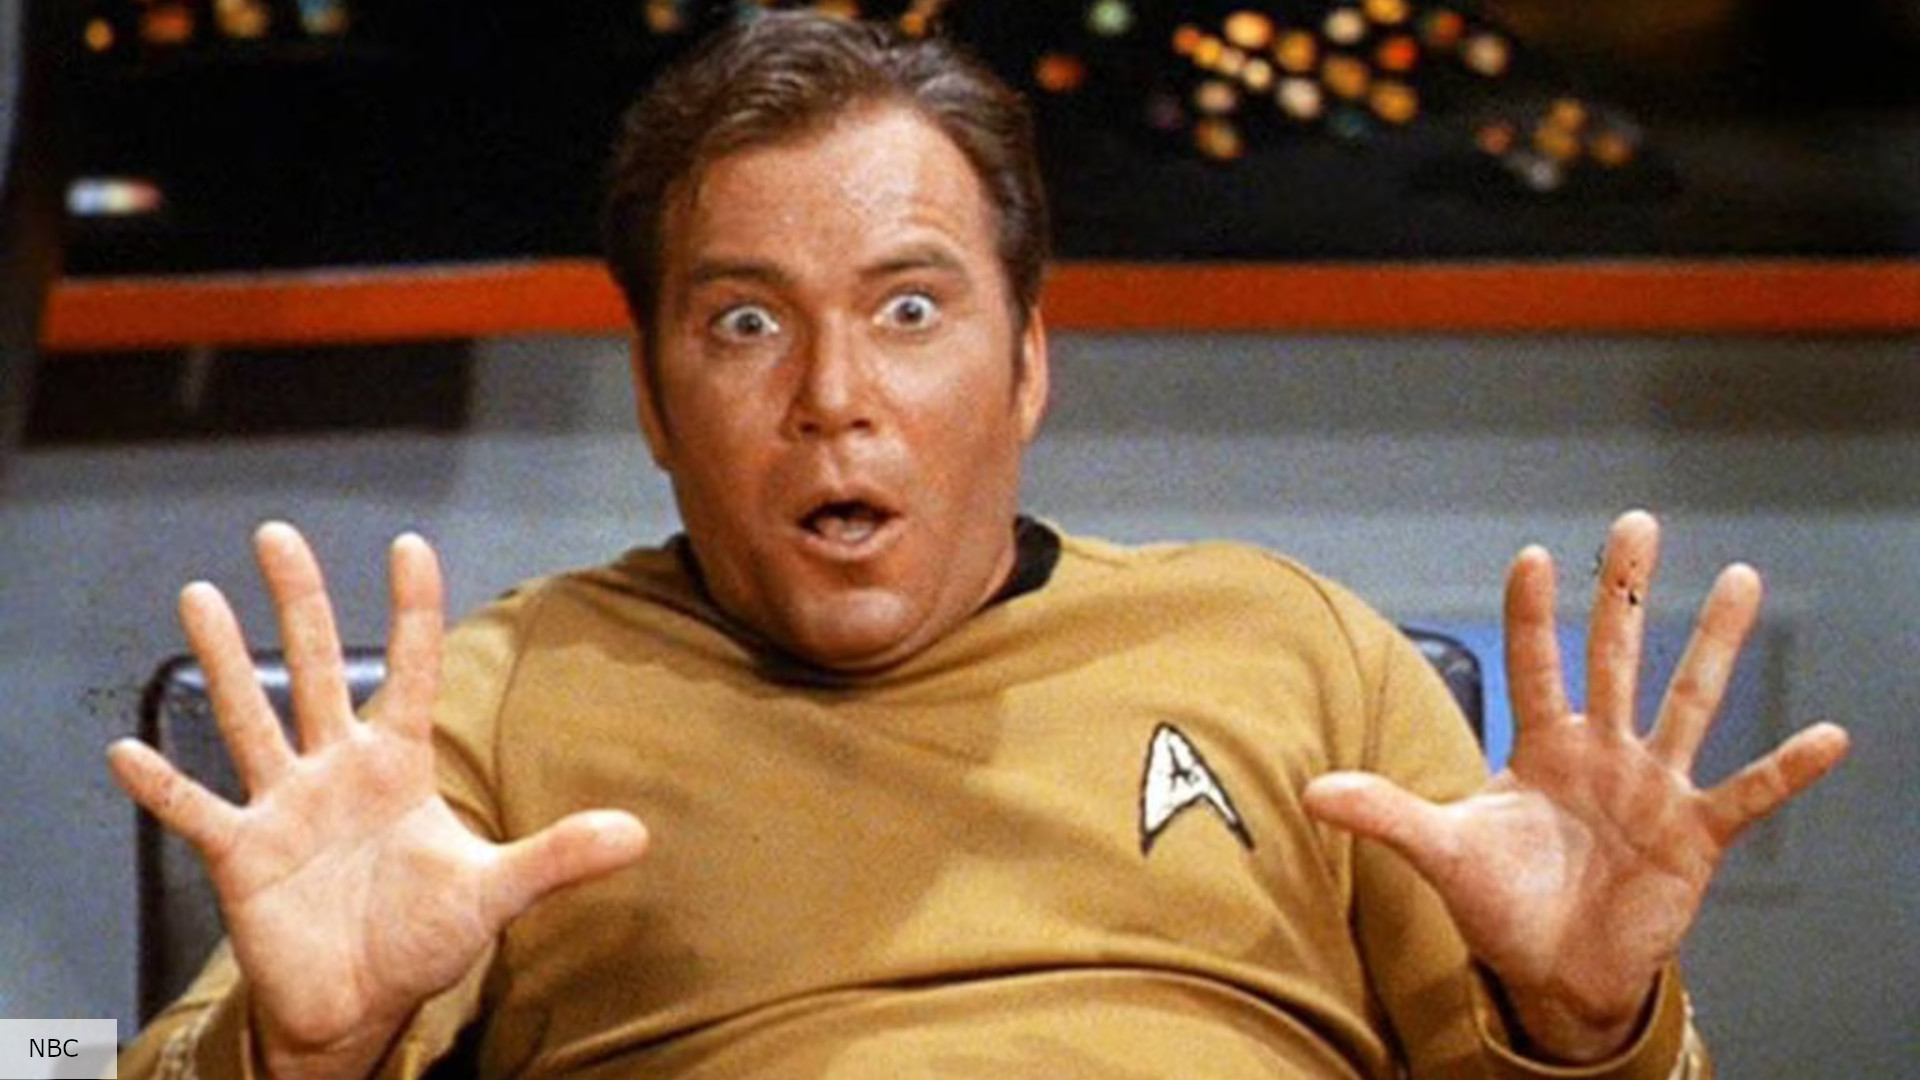 Yes William Shatner Is Hosting A Space Themed Reality Show